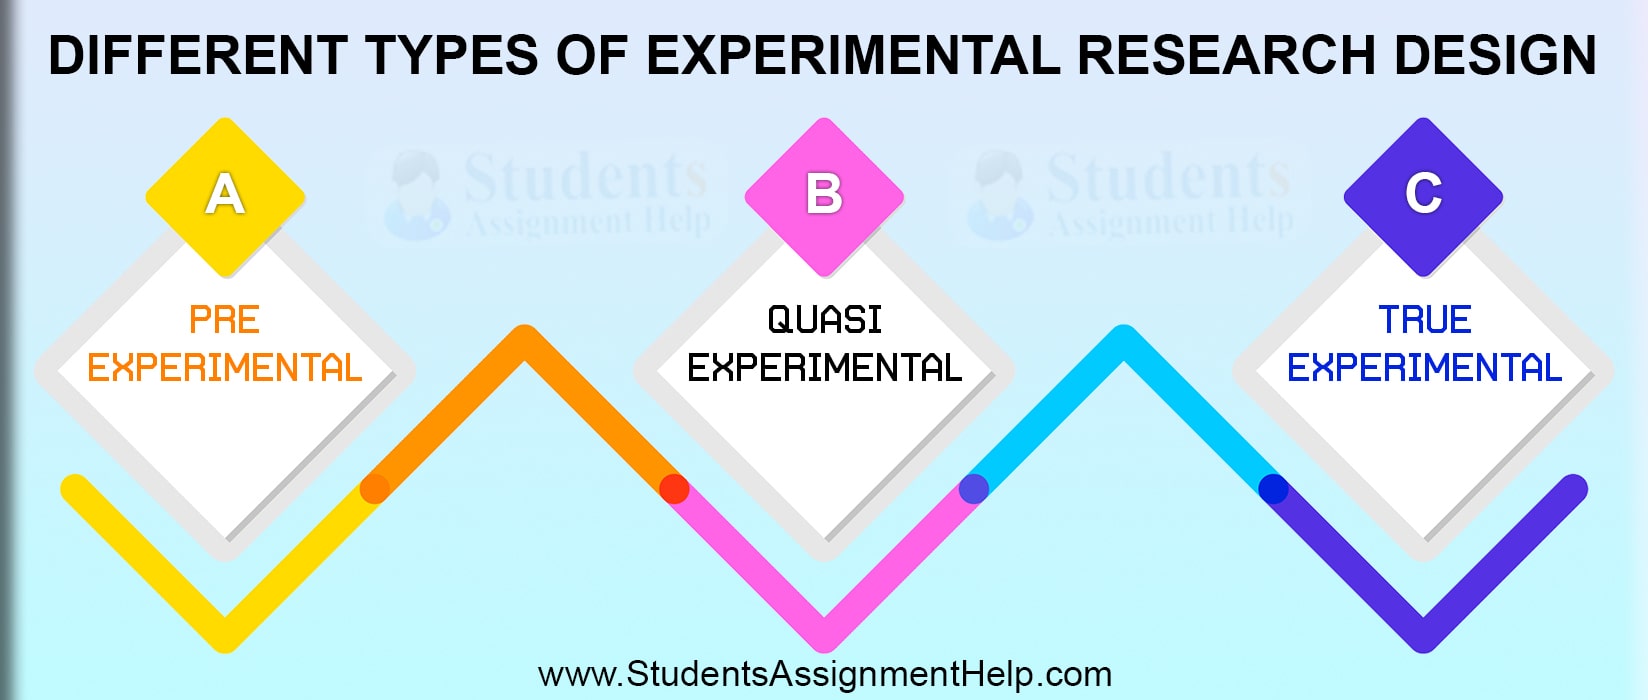 experimental research design according to experts